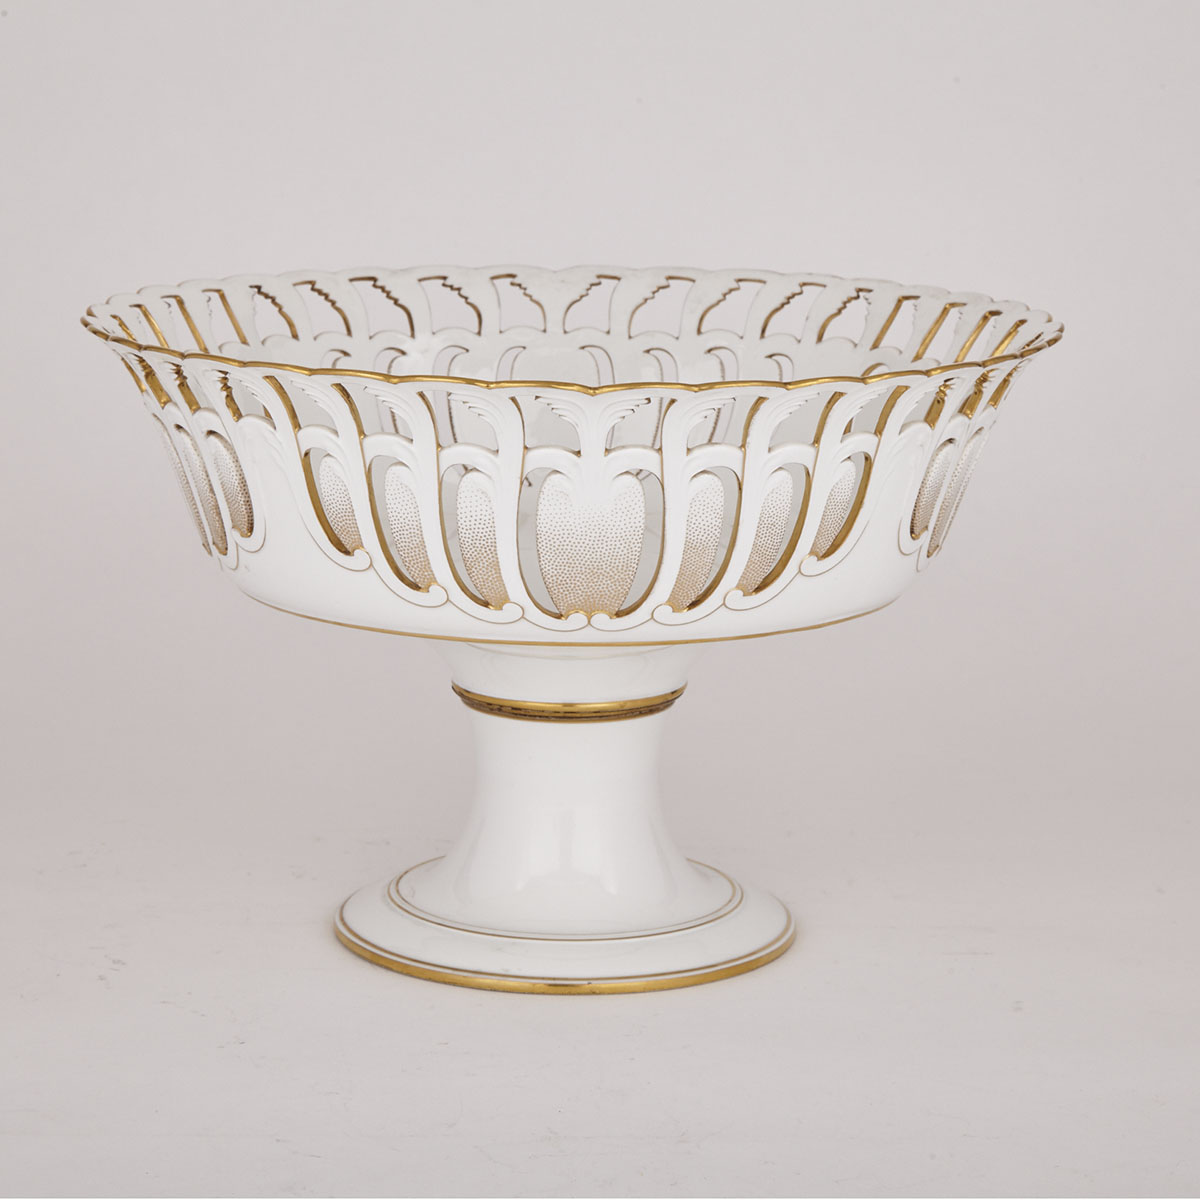 Sèvres Pierced and Gilt Pedestal-Footed Bowl, 19th century